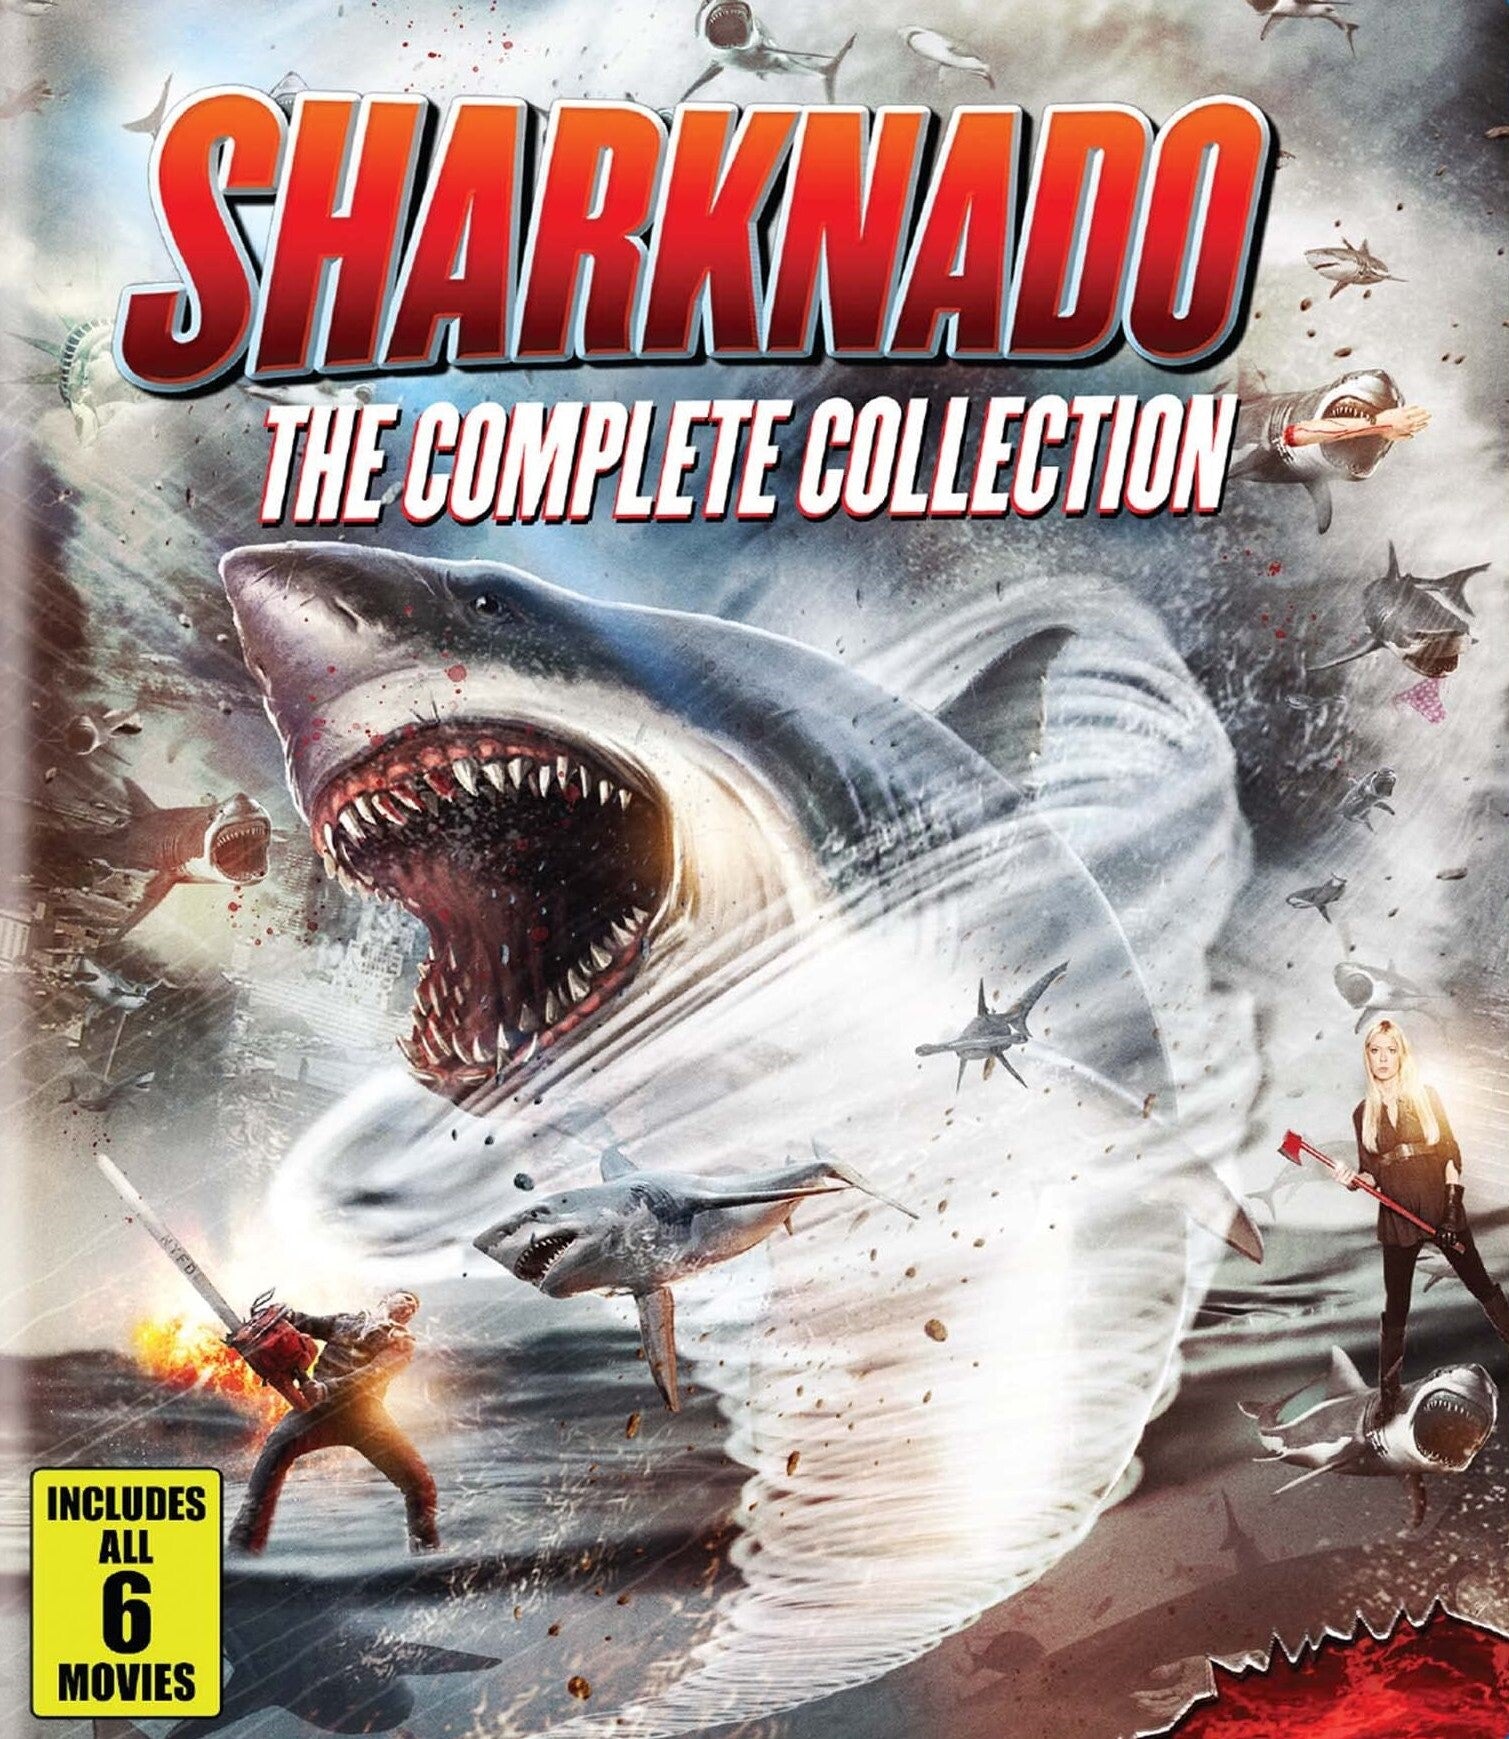 SHARKNADO: THE COMPLETE COLLECTION BLU-RAY